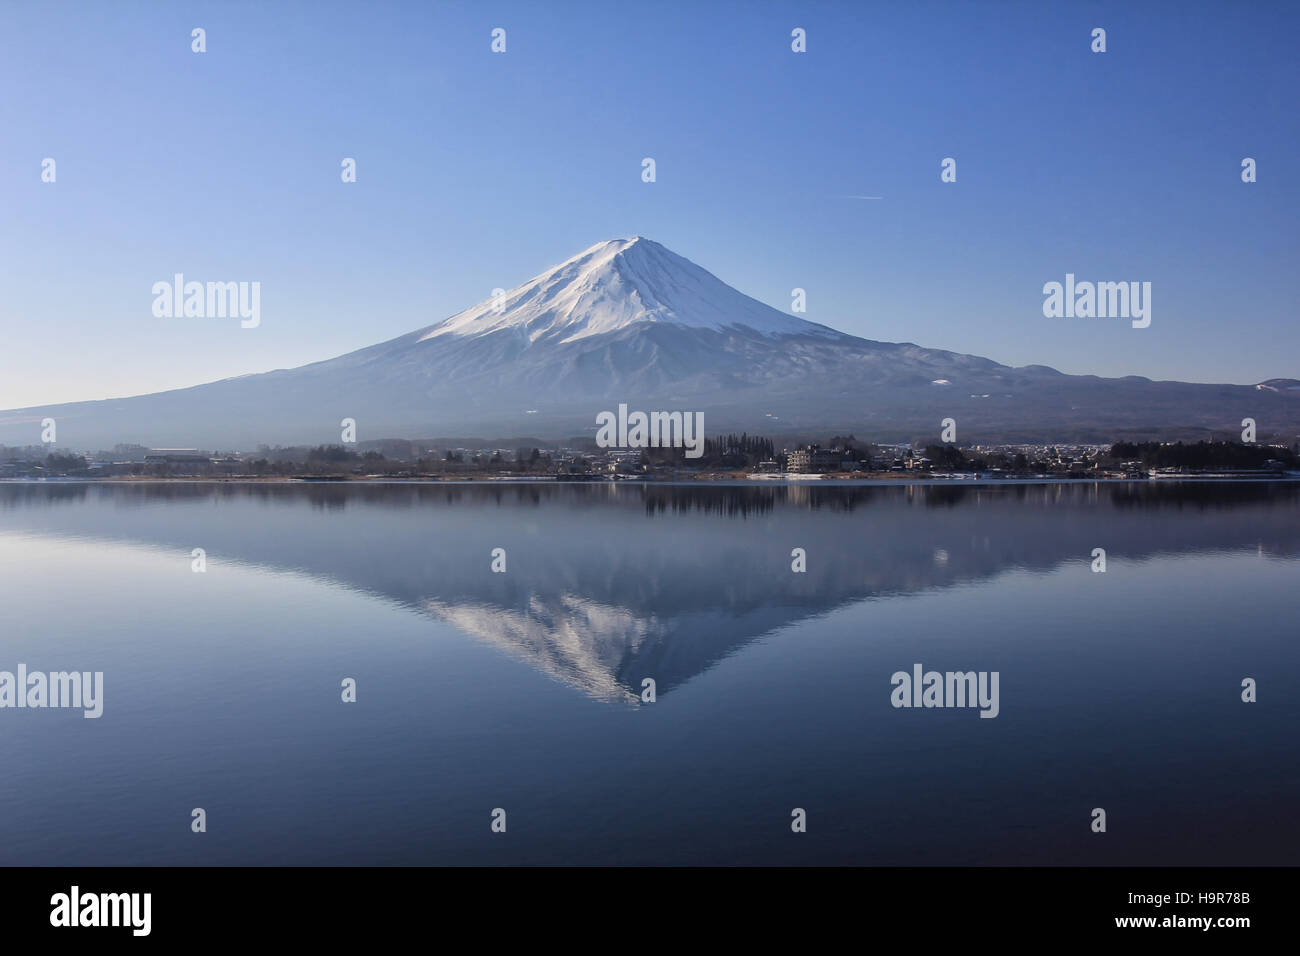 Mount Fuji mirror reflection view from the lake Kawaguchi in January 2015, Japan. The top of the mountain is covered with snow. Stock Photo